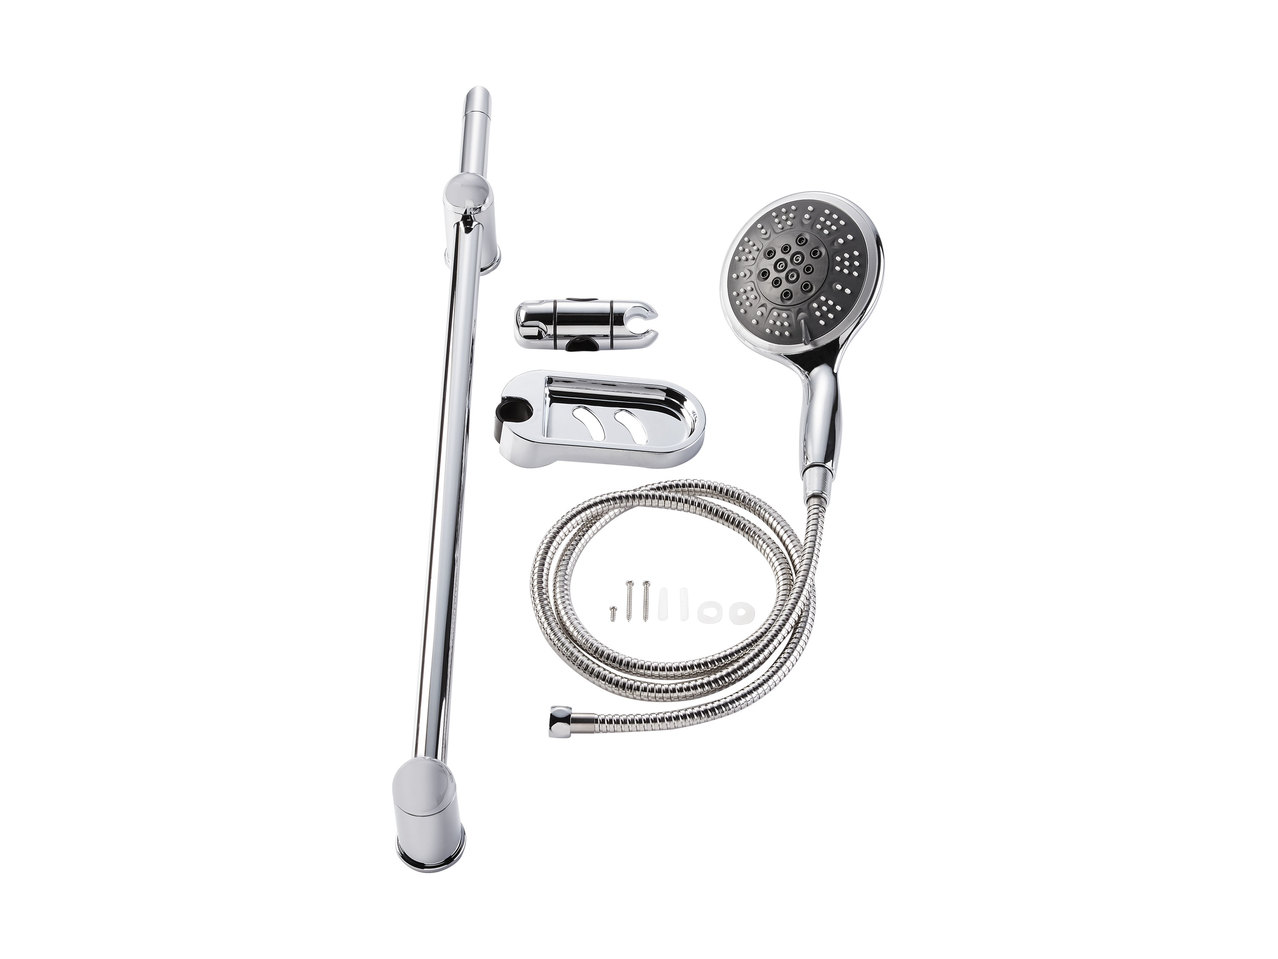 Miomare Multi-function Shower Head with Shower Rail1